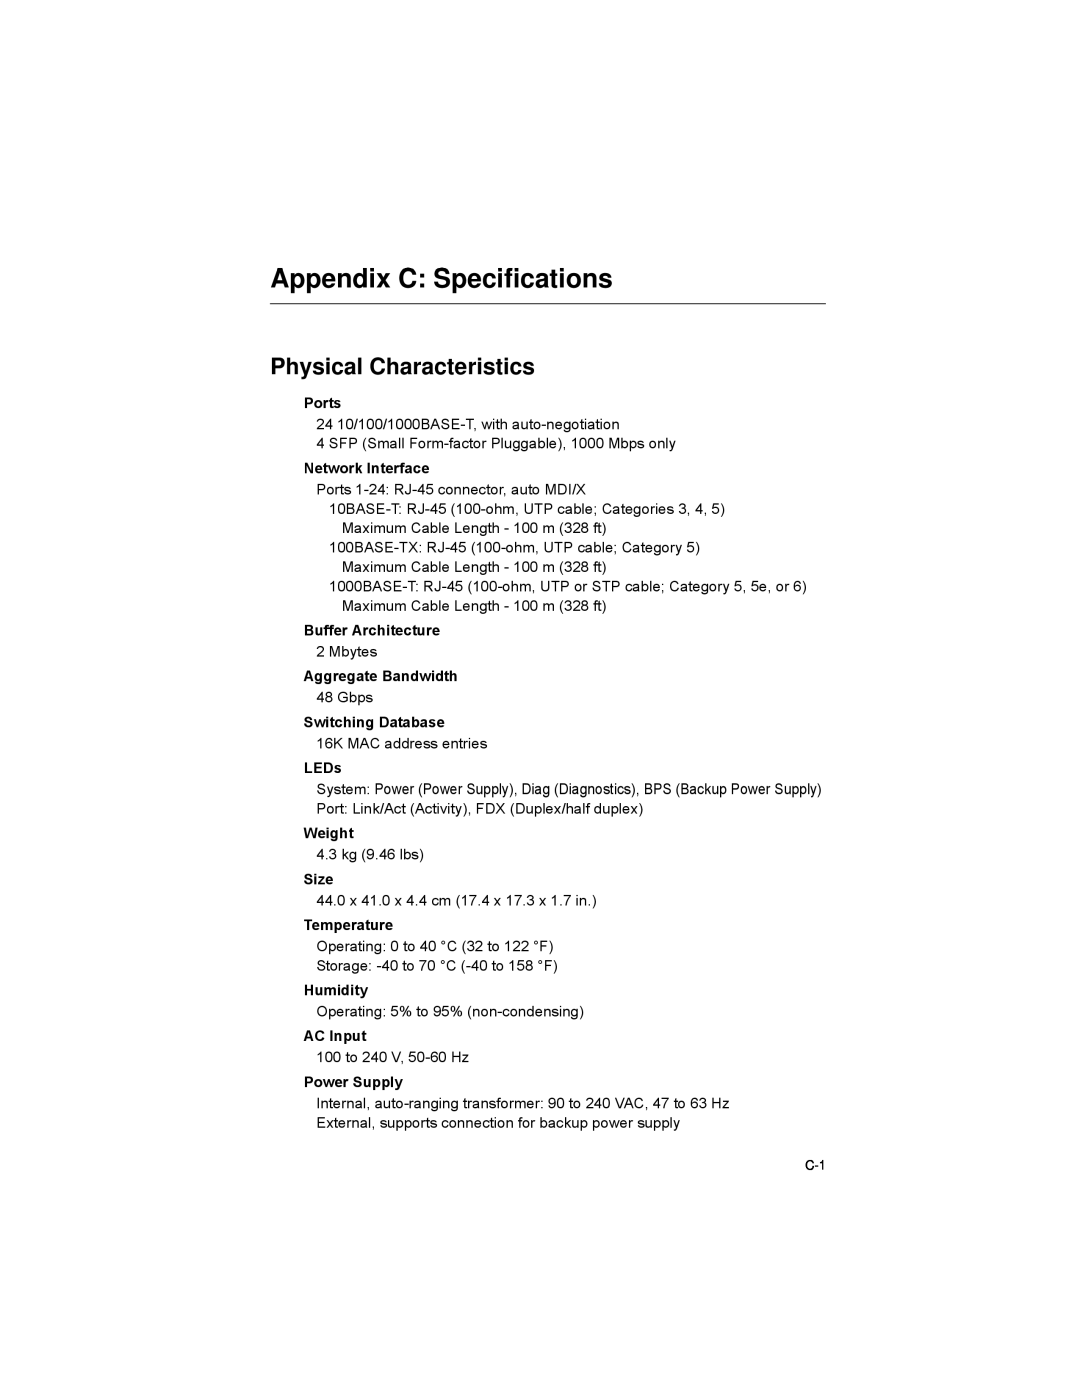 Alcatel-Lucent 6300-24 manual Appendix C Specifications, Physical Characteristics 